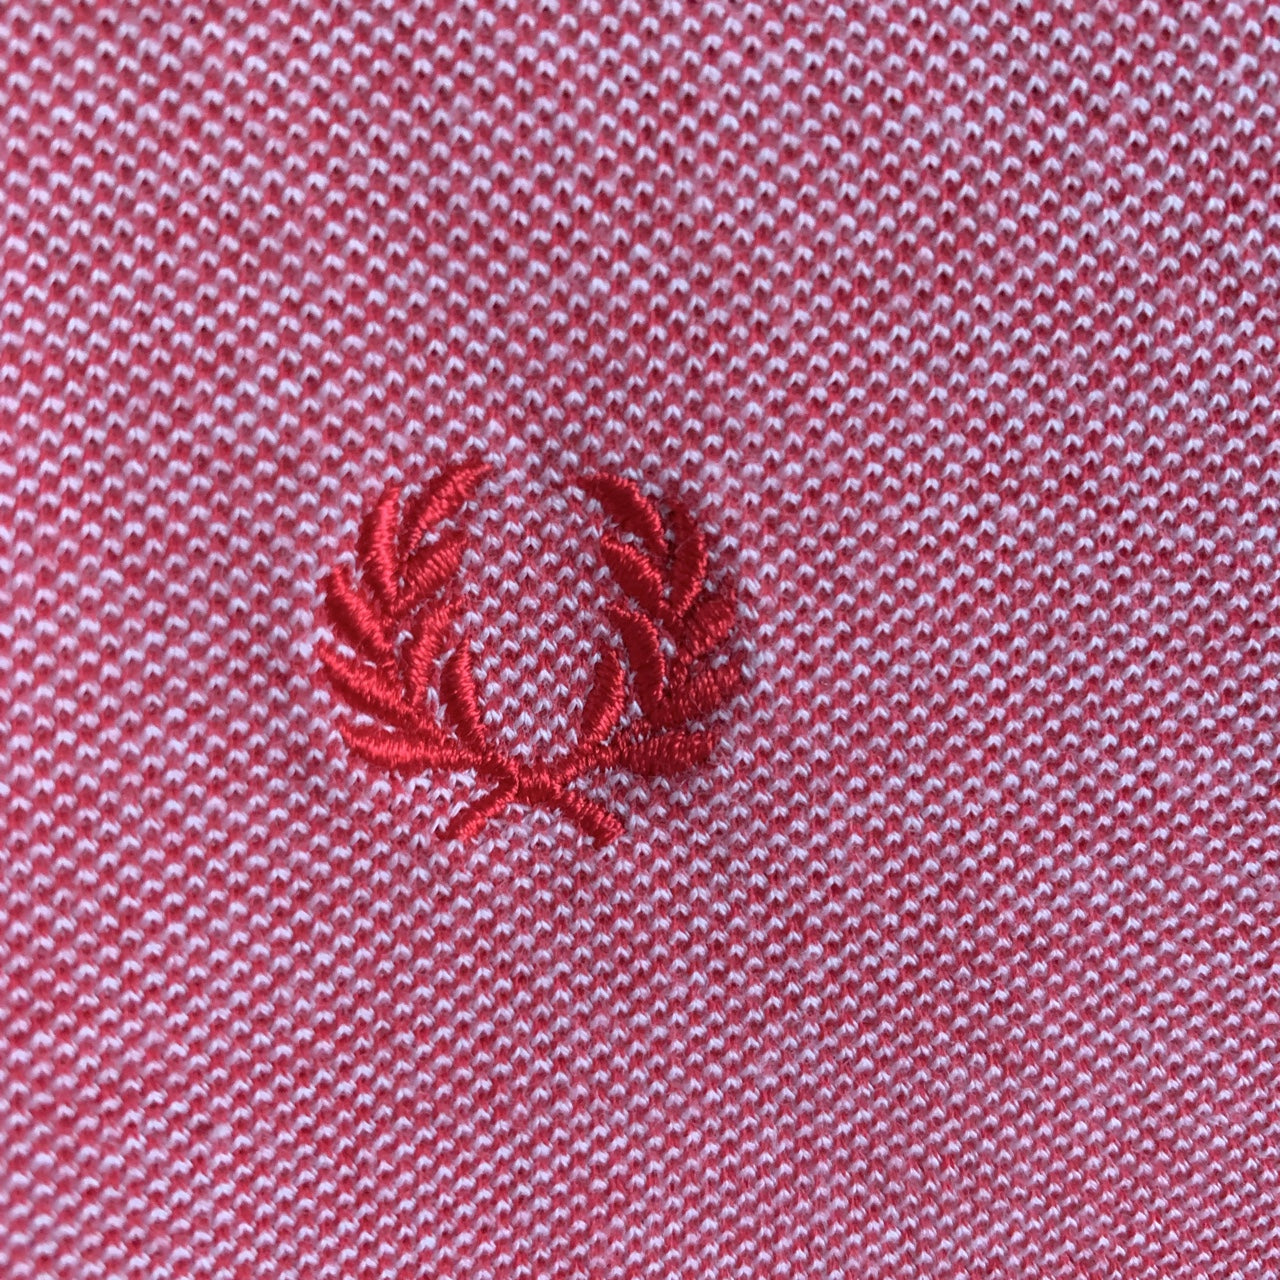 Fred Perry Vintage Salmon Pink 100% Cotton Polo Shirt Size S